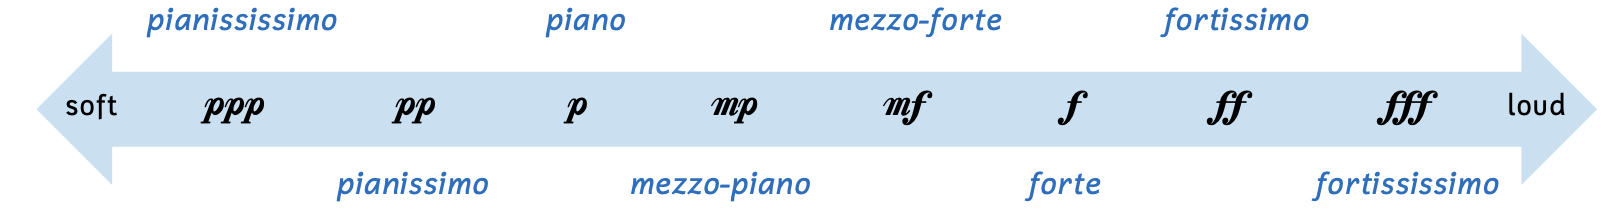 Diagram of range of dynamics. The spectrum shows the softest dynamics to the left and the loudest to the right. The order from softest to loudest is pianississimo, pianissimo, piano, mezzopiano, mezzoforte, forte, fortissimo, and fortississimo.